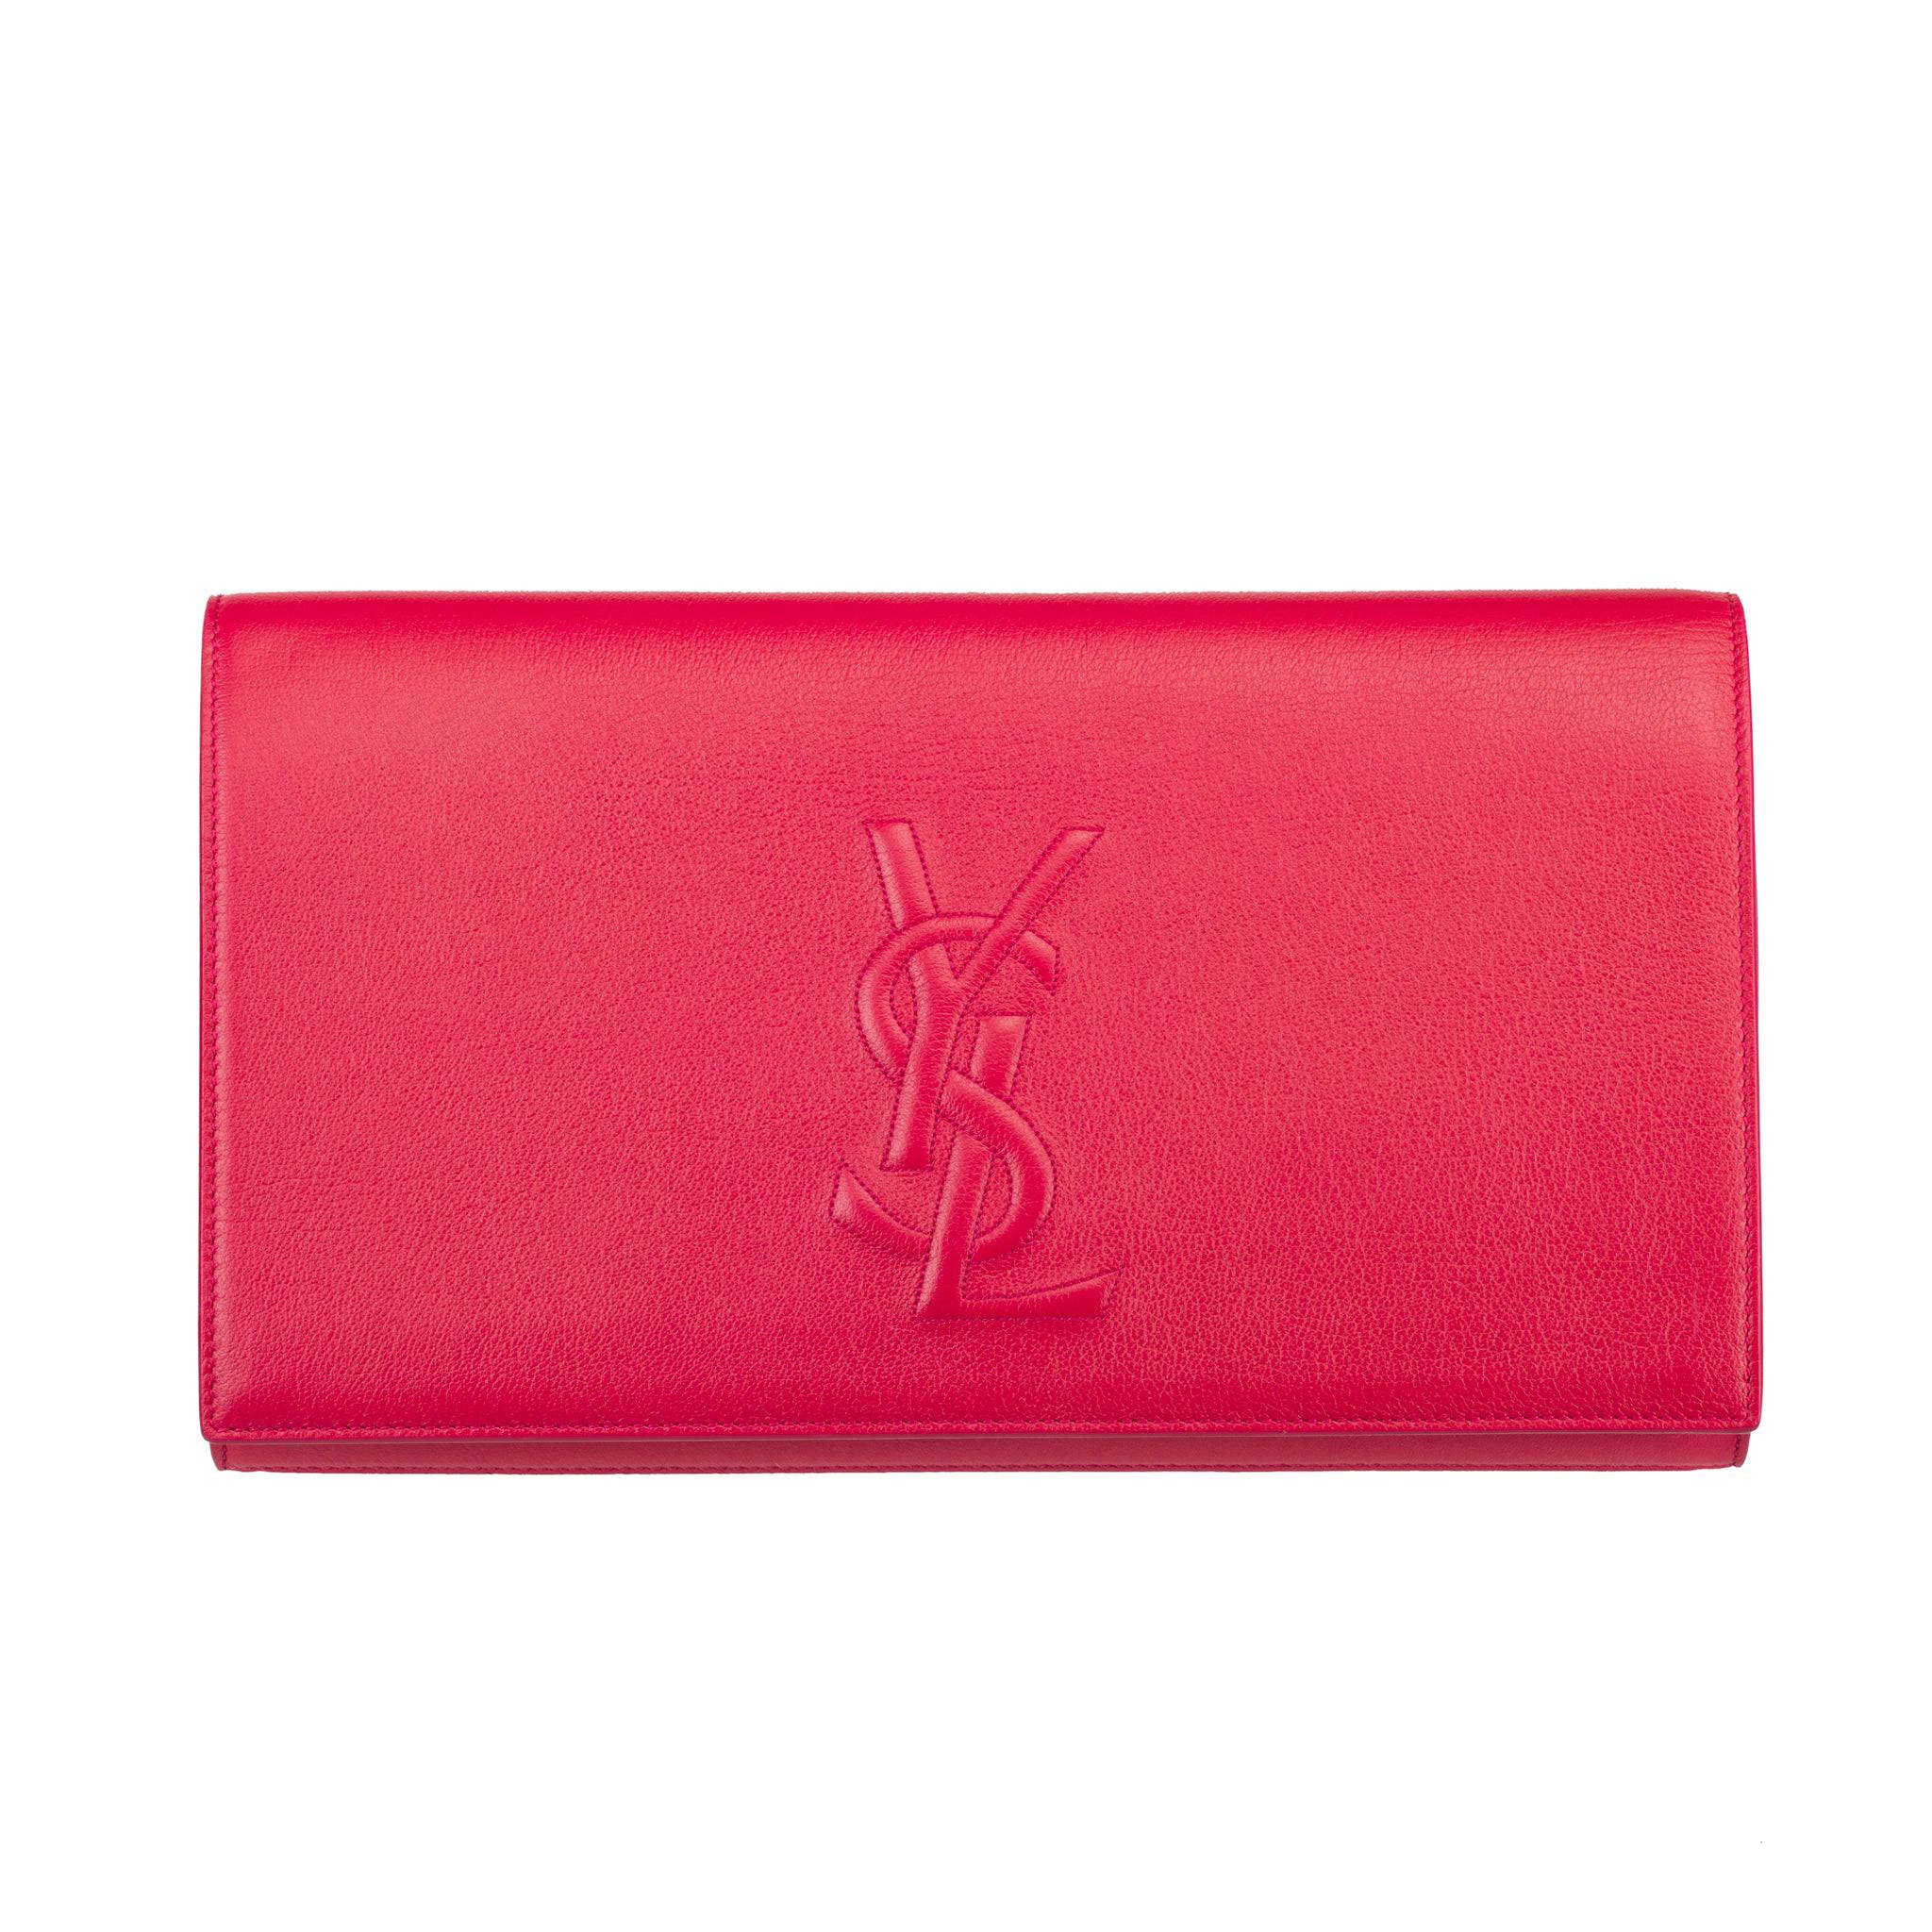 YVES SAINT LAURENT PINK LEATHER CLUTCH - On Repeat